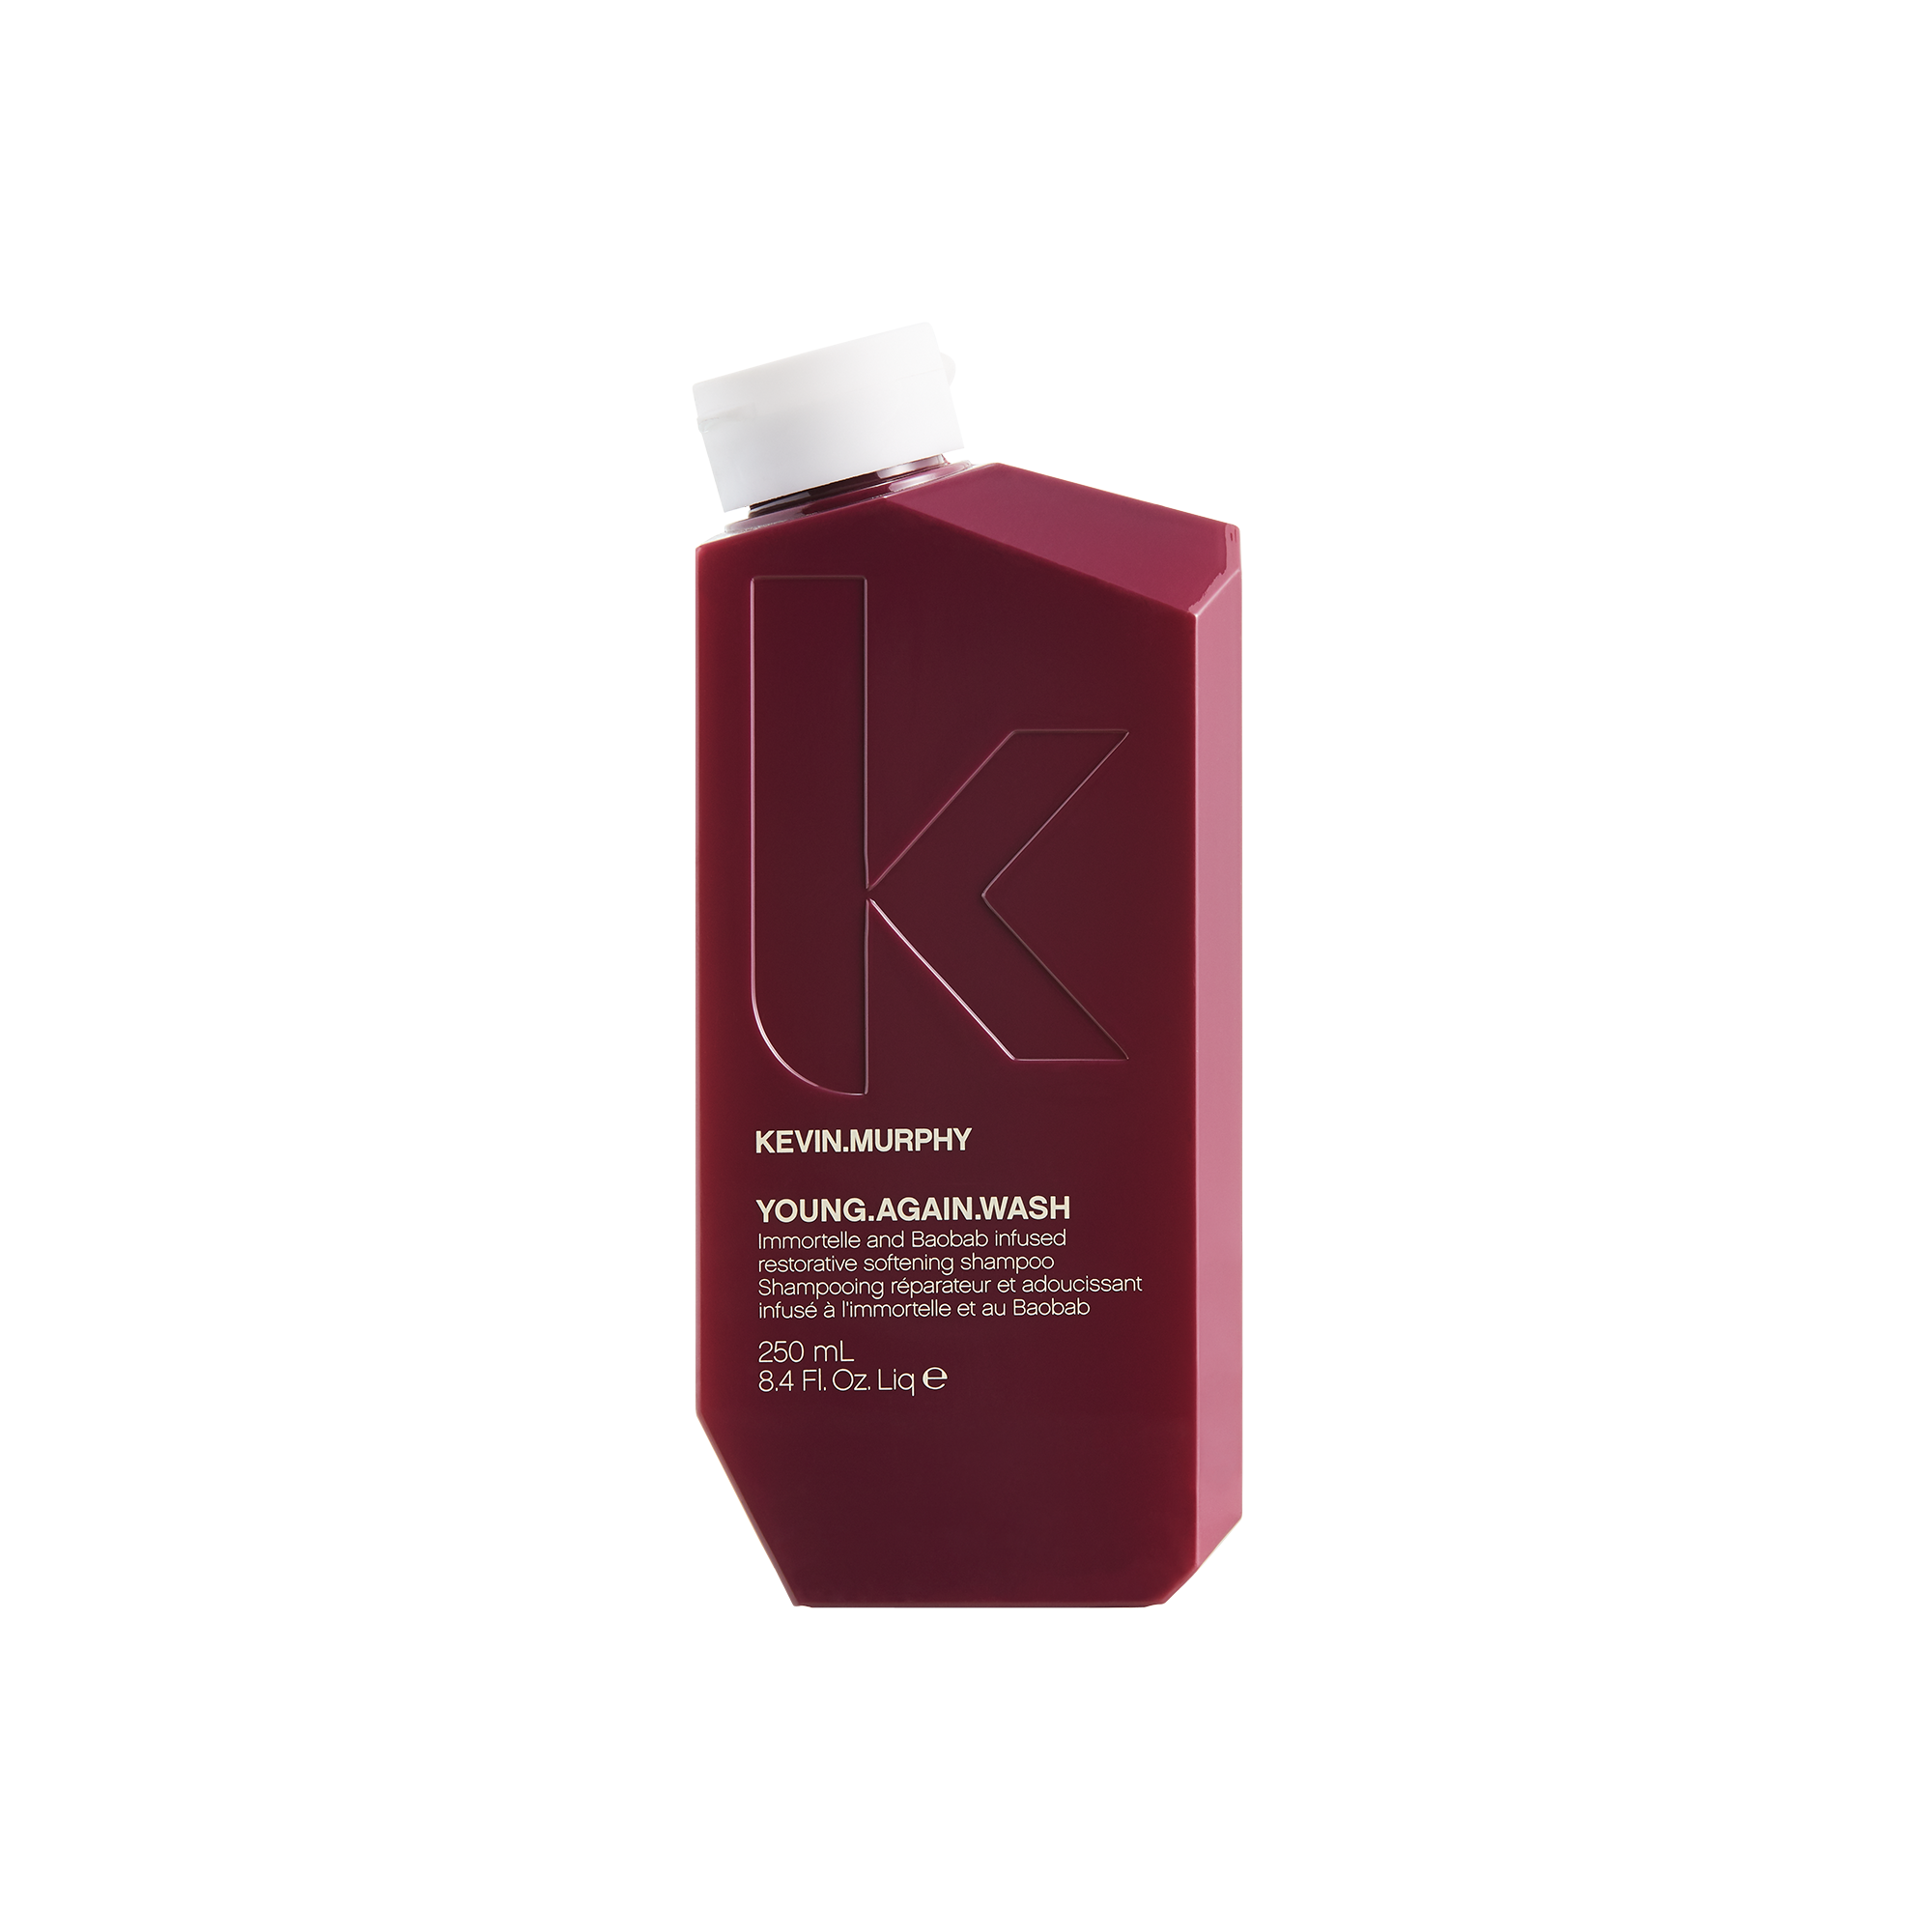 Kevin Murphy - Young.Again.Wash 250 ml.